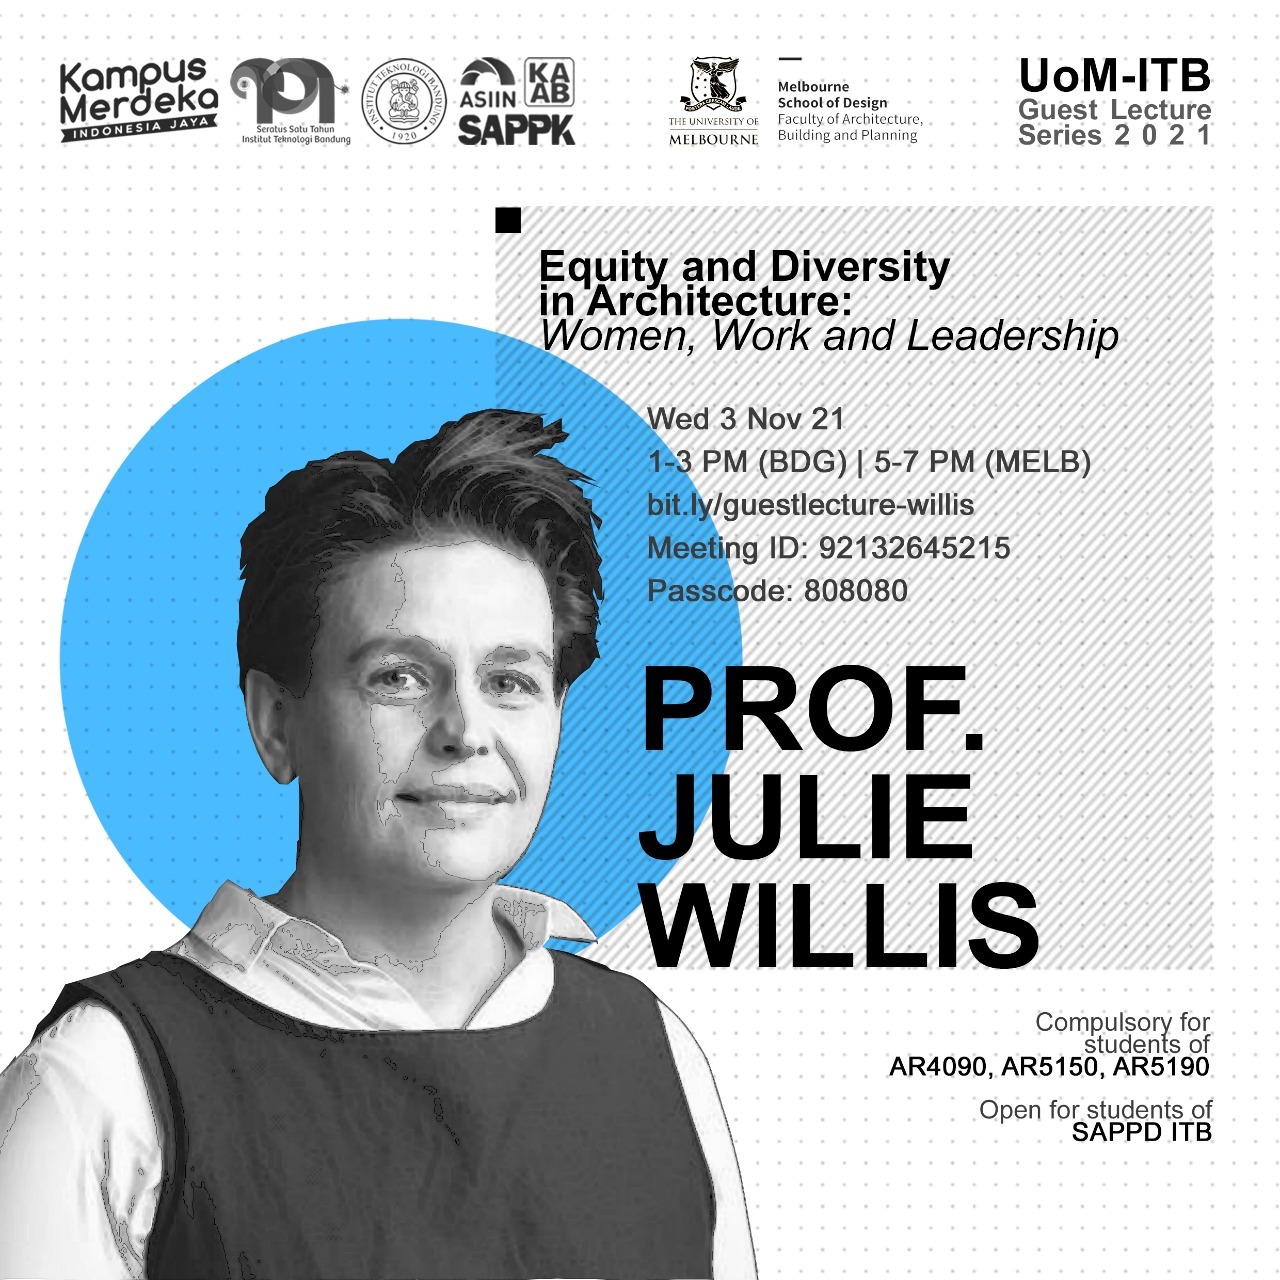 UOM-ITB GUEST LECTURE SERIES 2021: EQUITY AND DIVERSITY IN ARCHITECTURE: WOMEN, WORK AND LEADERSHIP